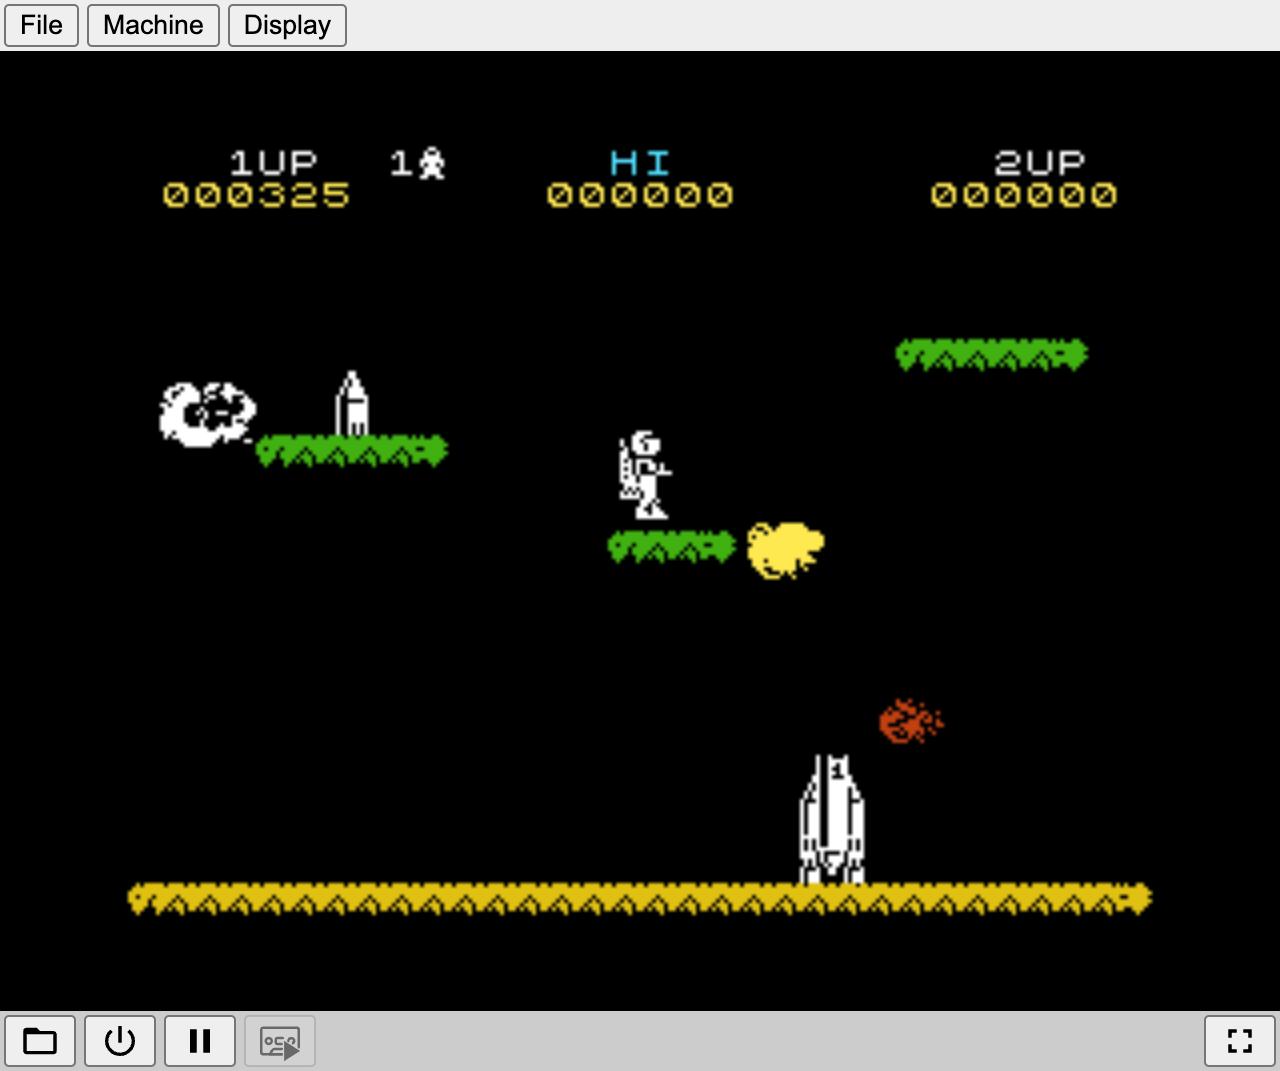 Screenshot of Jetpac being played in a web browser.